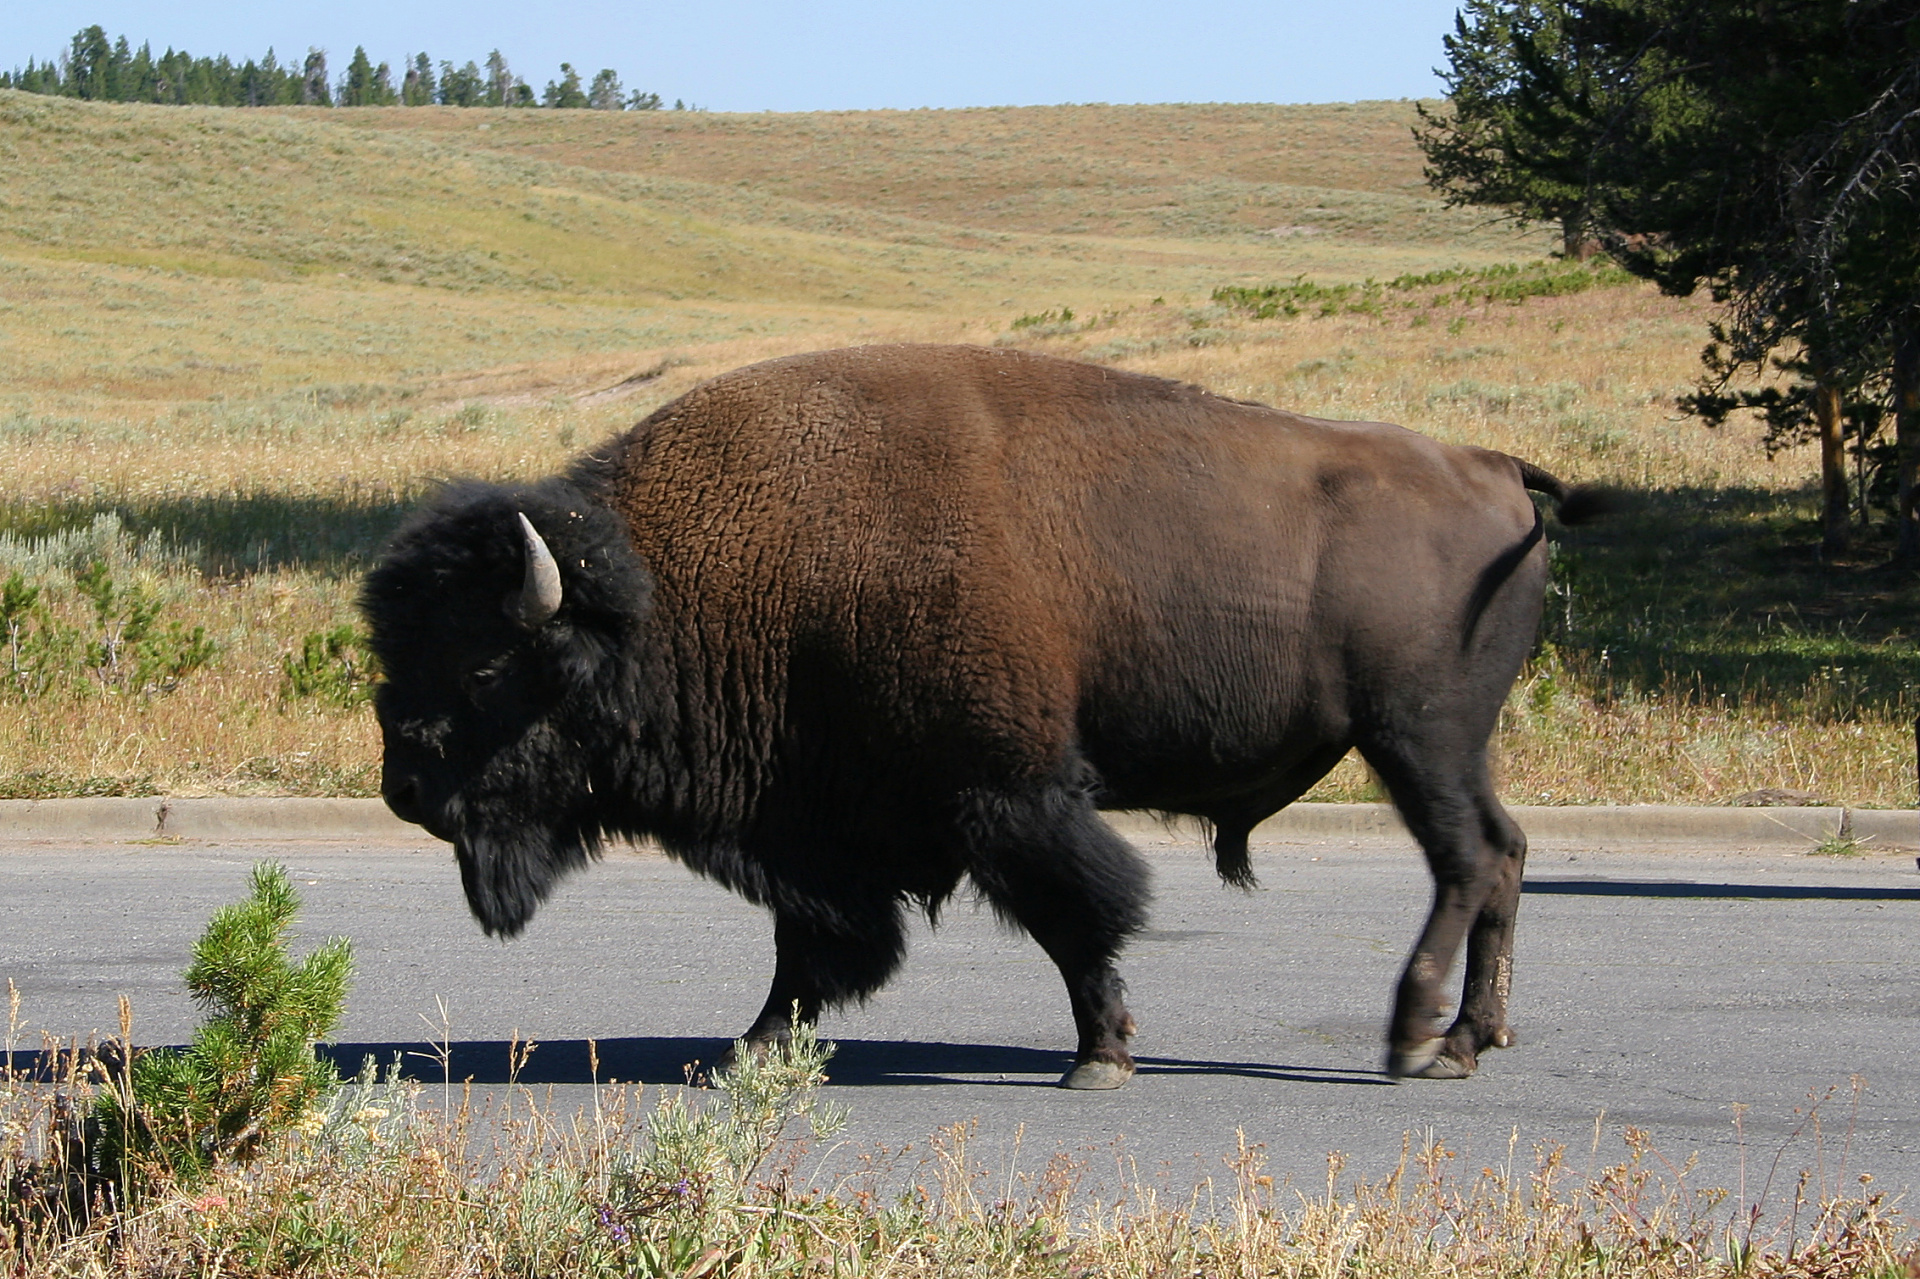 Second Herd (Travels » US Trip 1: Cheyenne Country » The Journey » Yellowstone National Park » Buffalos)